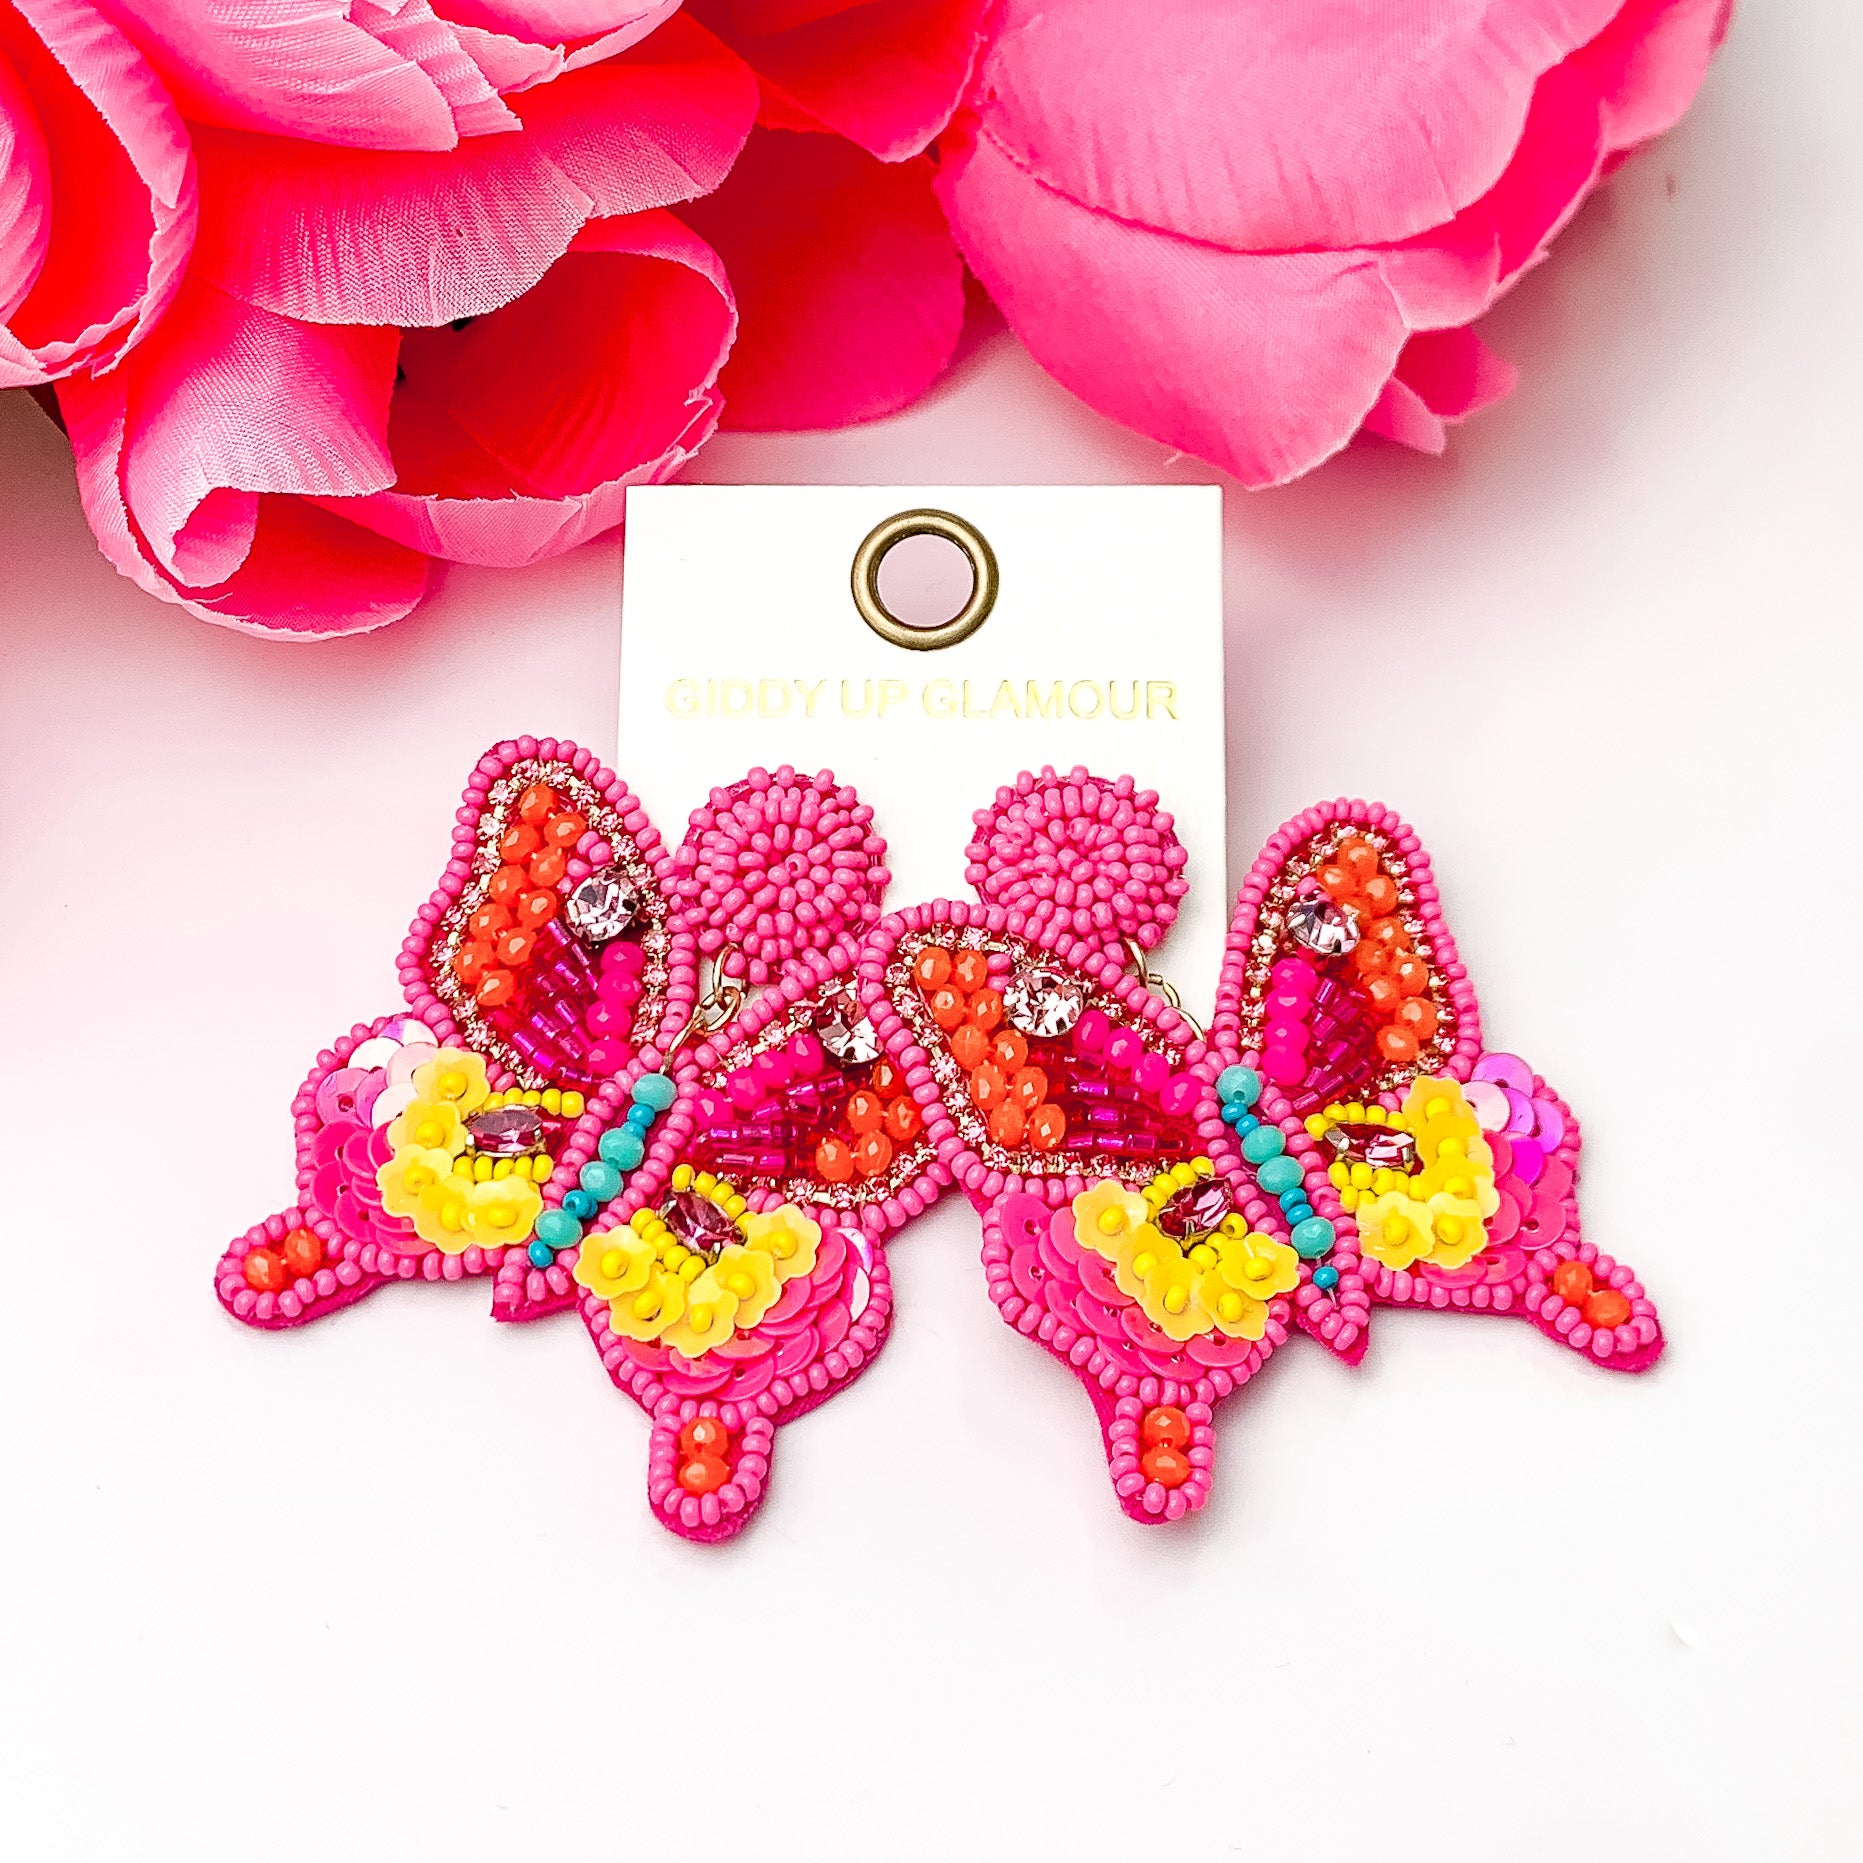 Hot Pink beaded butterfly earrings. Pictured on a white background with white flowers at the top.